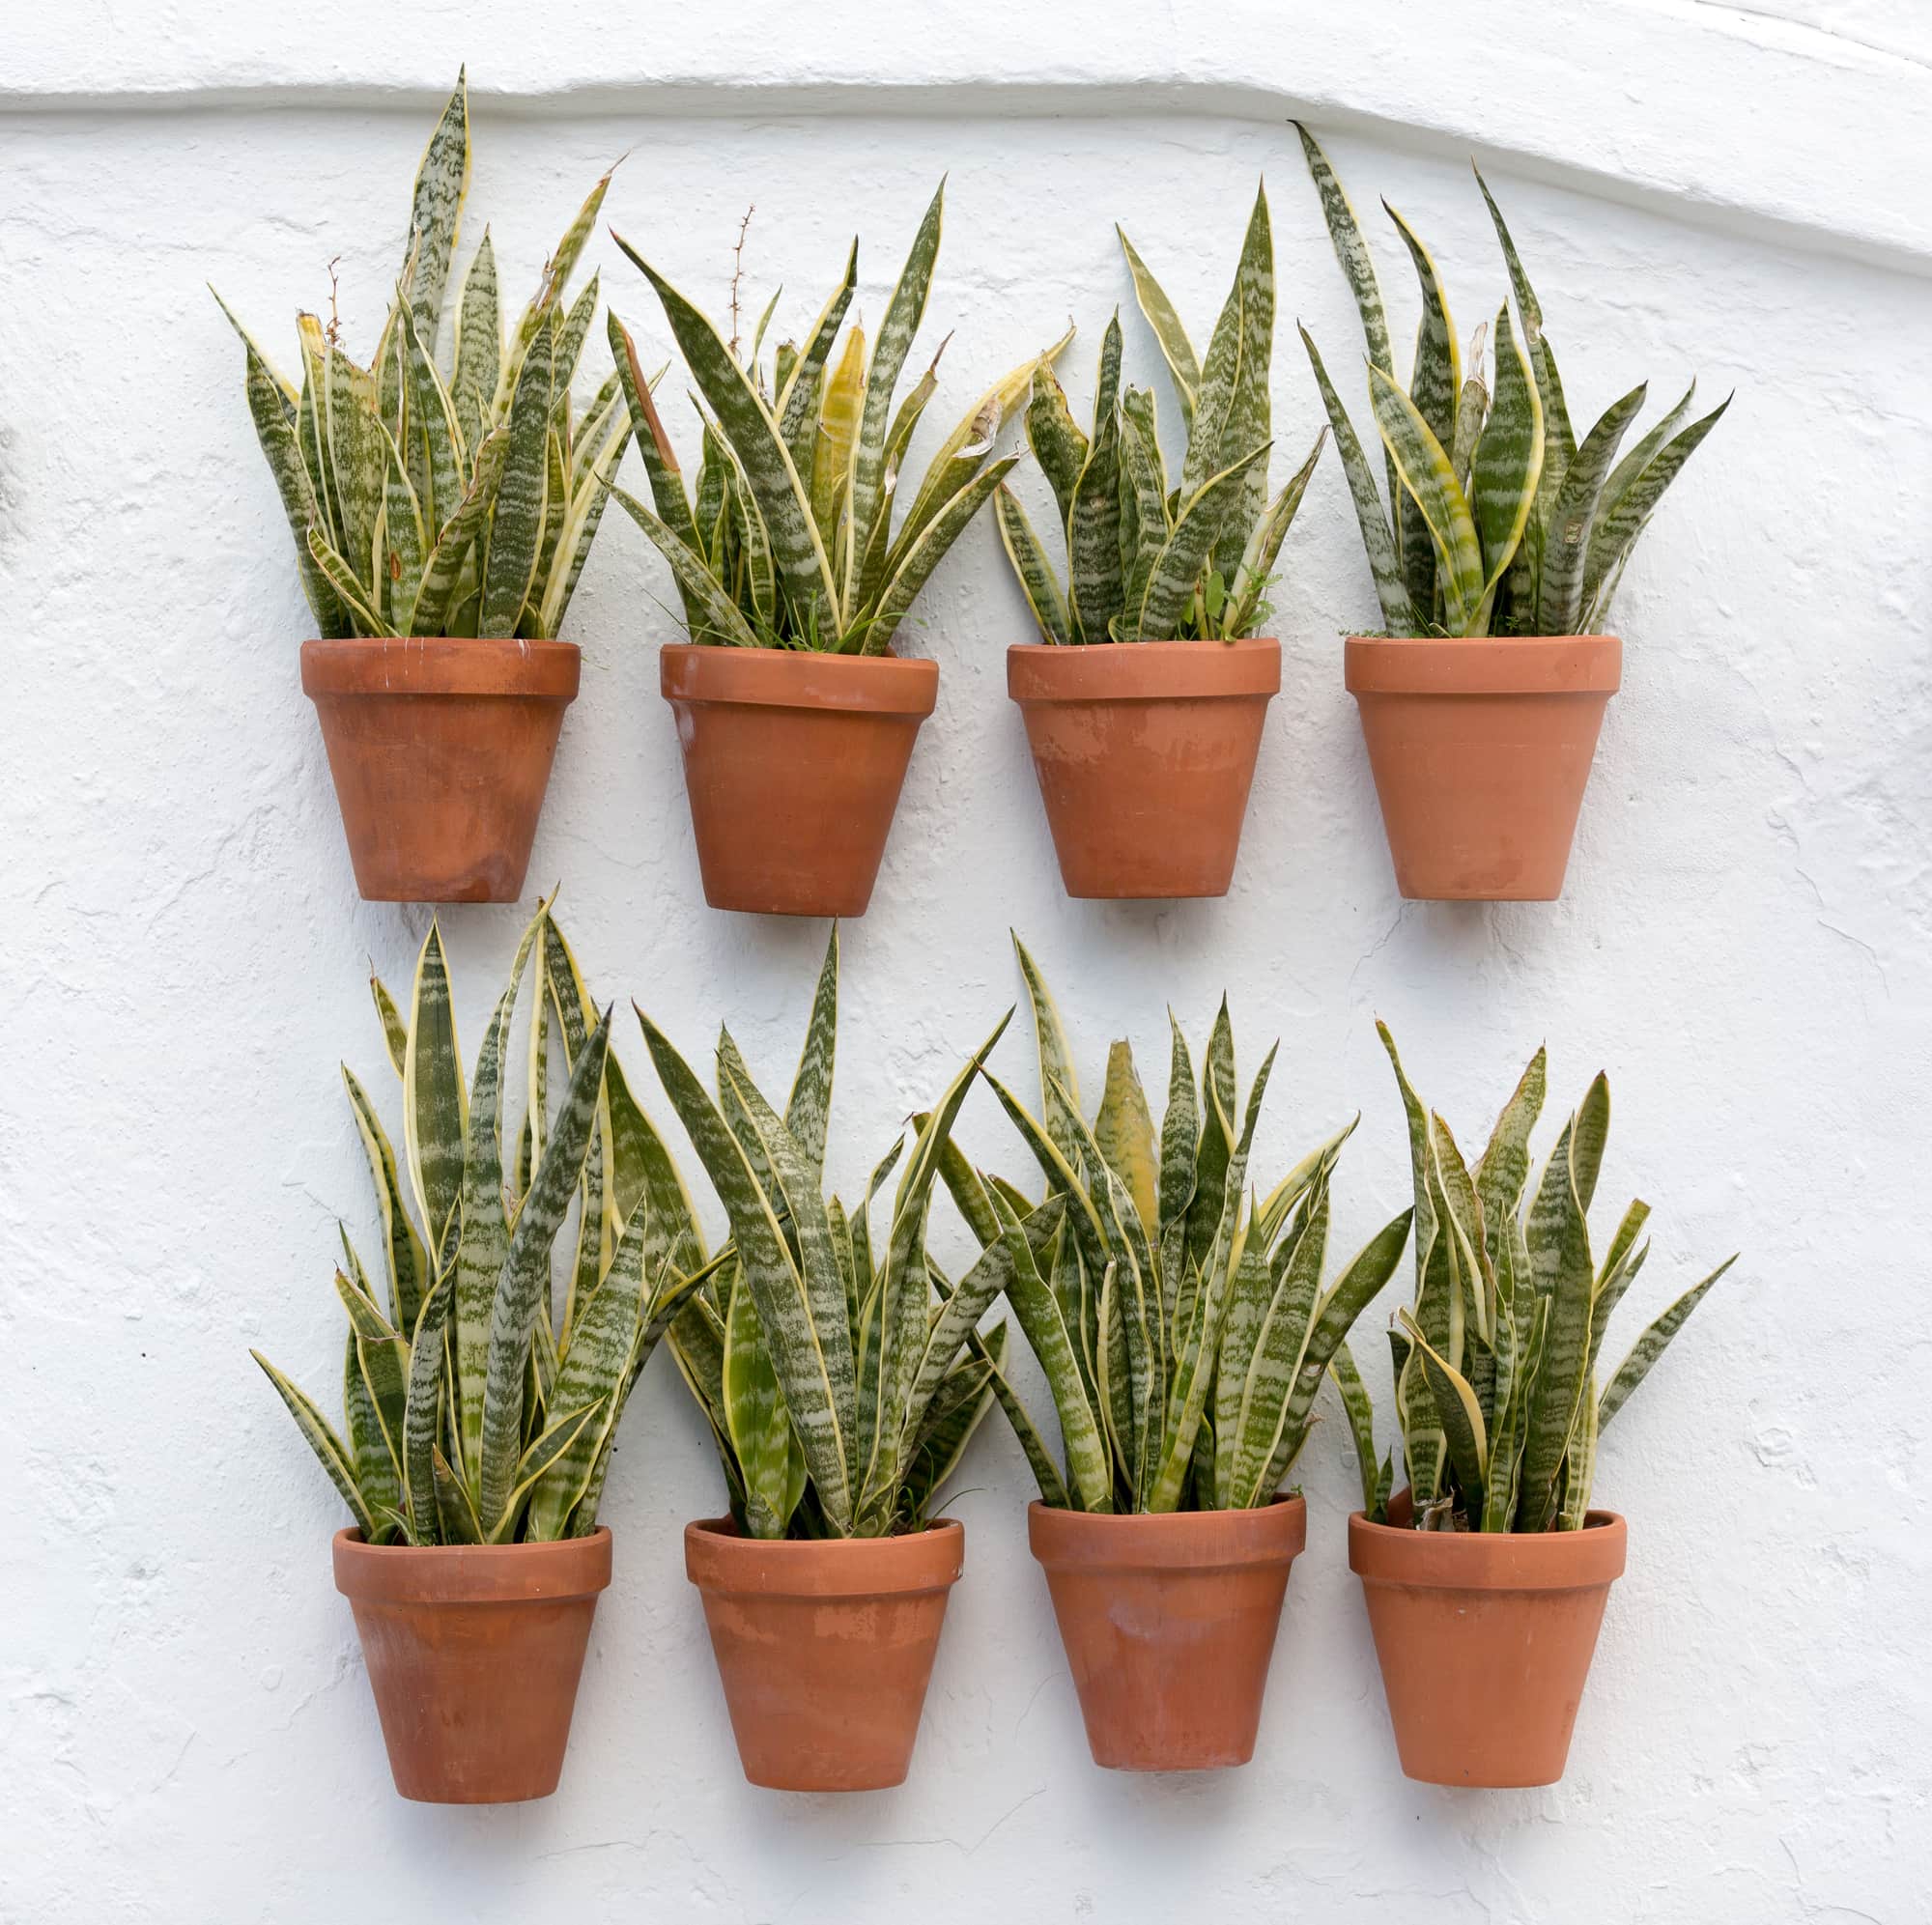 two rows of potted snake plants in terracotta pots